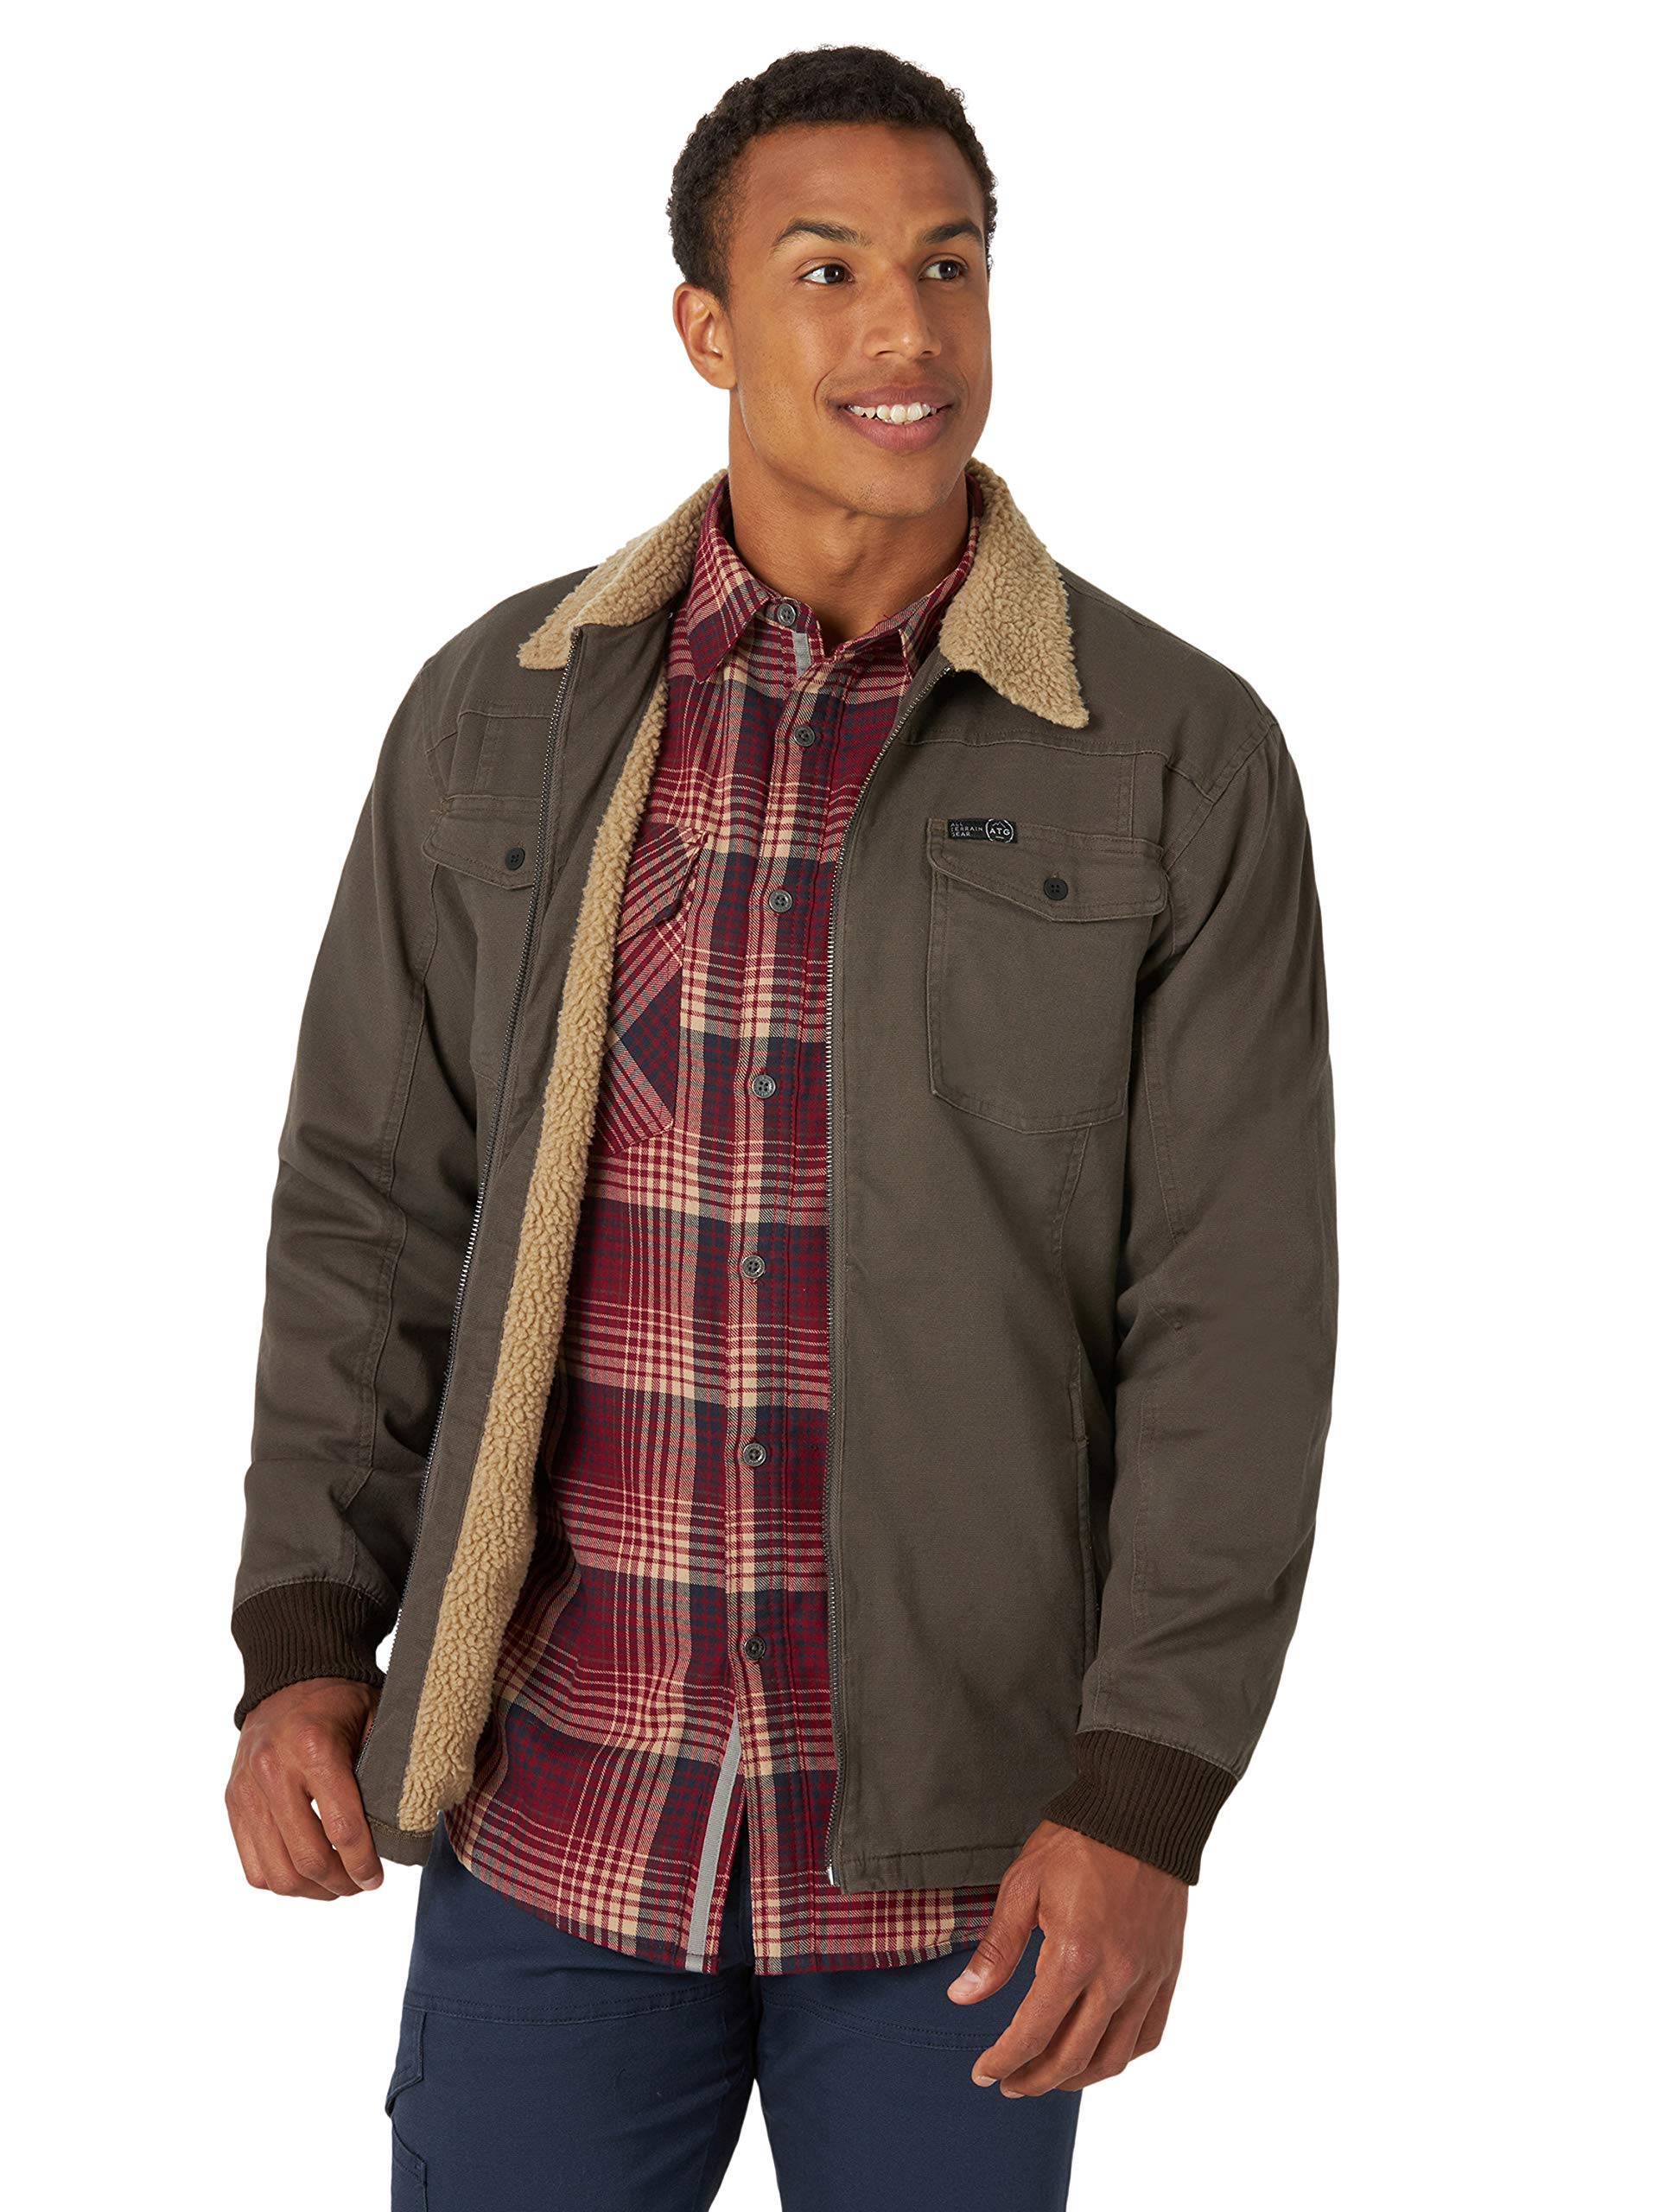 Sherpa lined jacket men's have become a popular choice for individuals seeking both style and functionality in their outerwear.